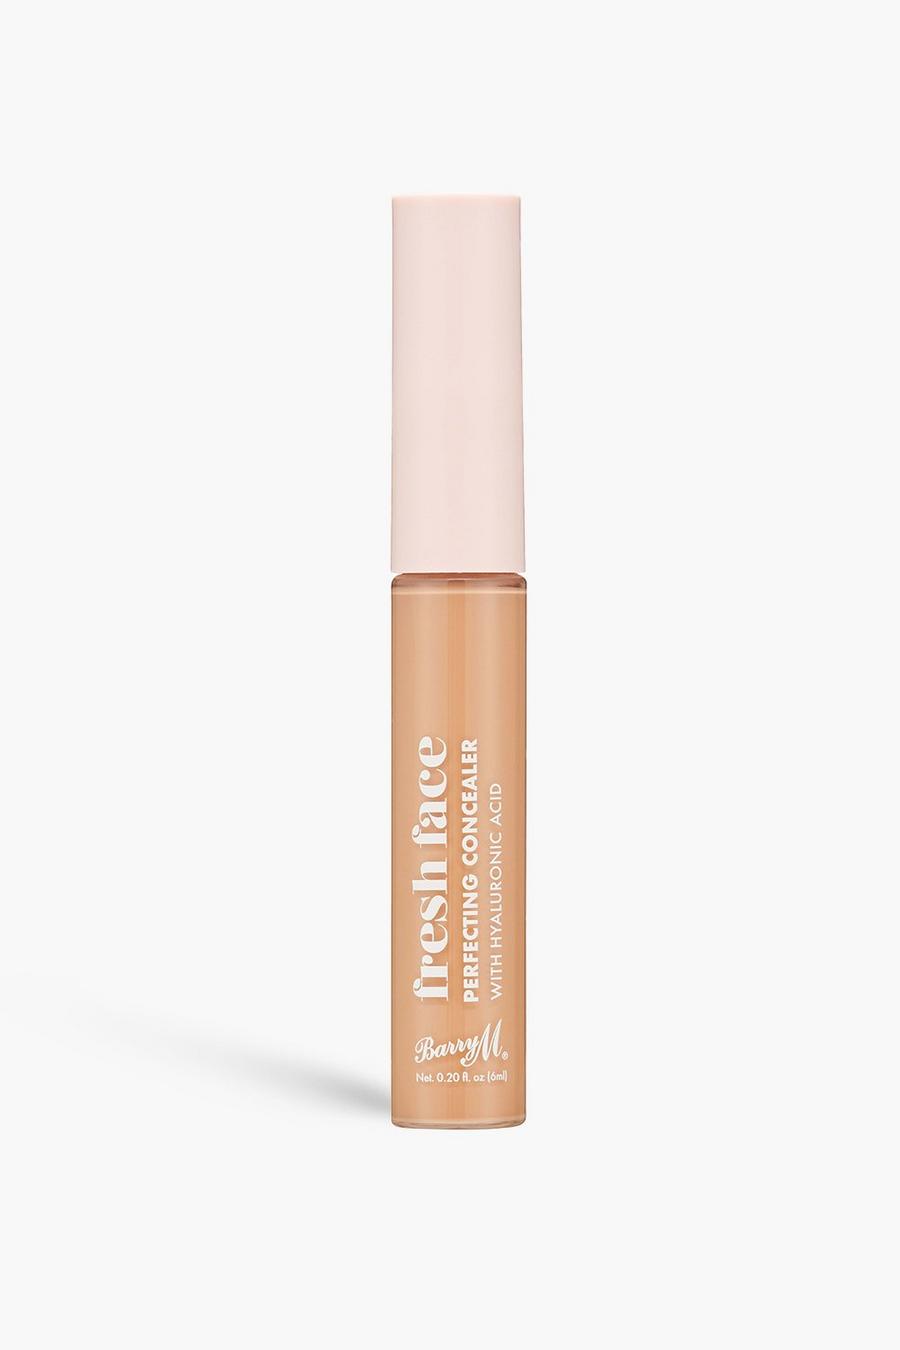 Tan marrone Barry M Fresh Face Perfecting Concealer 5